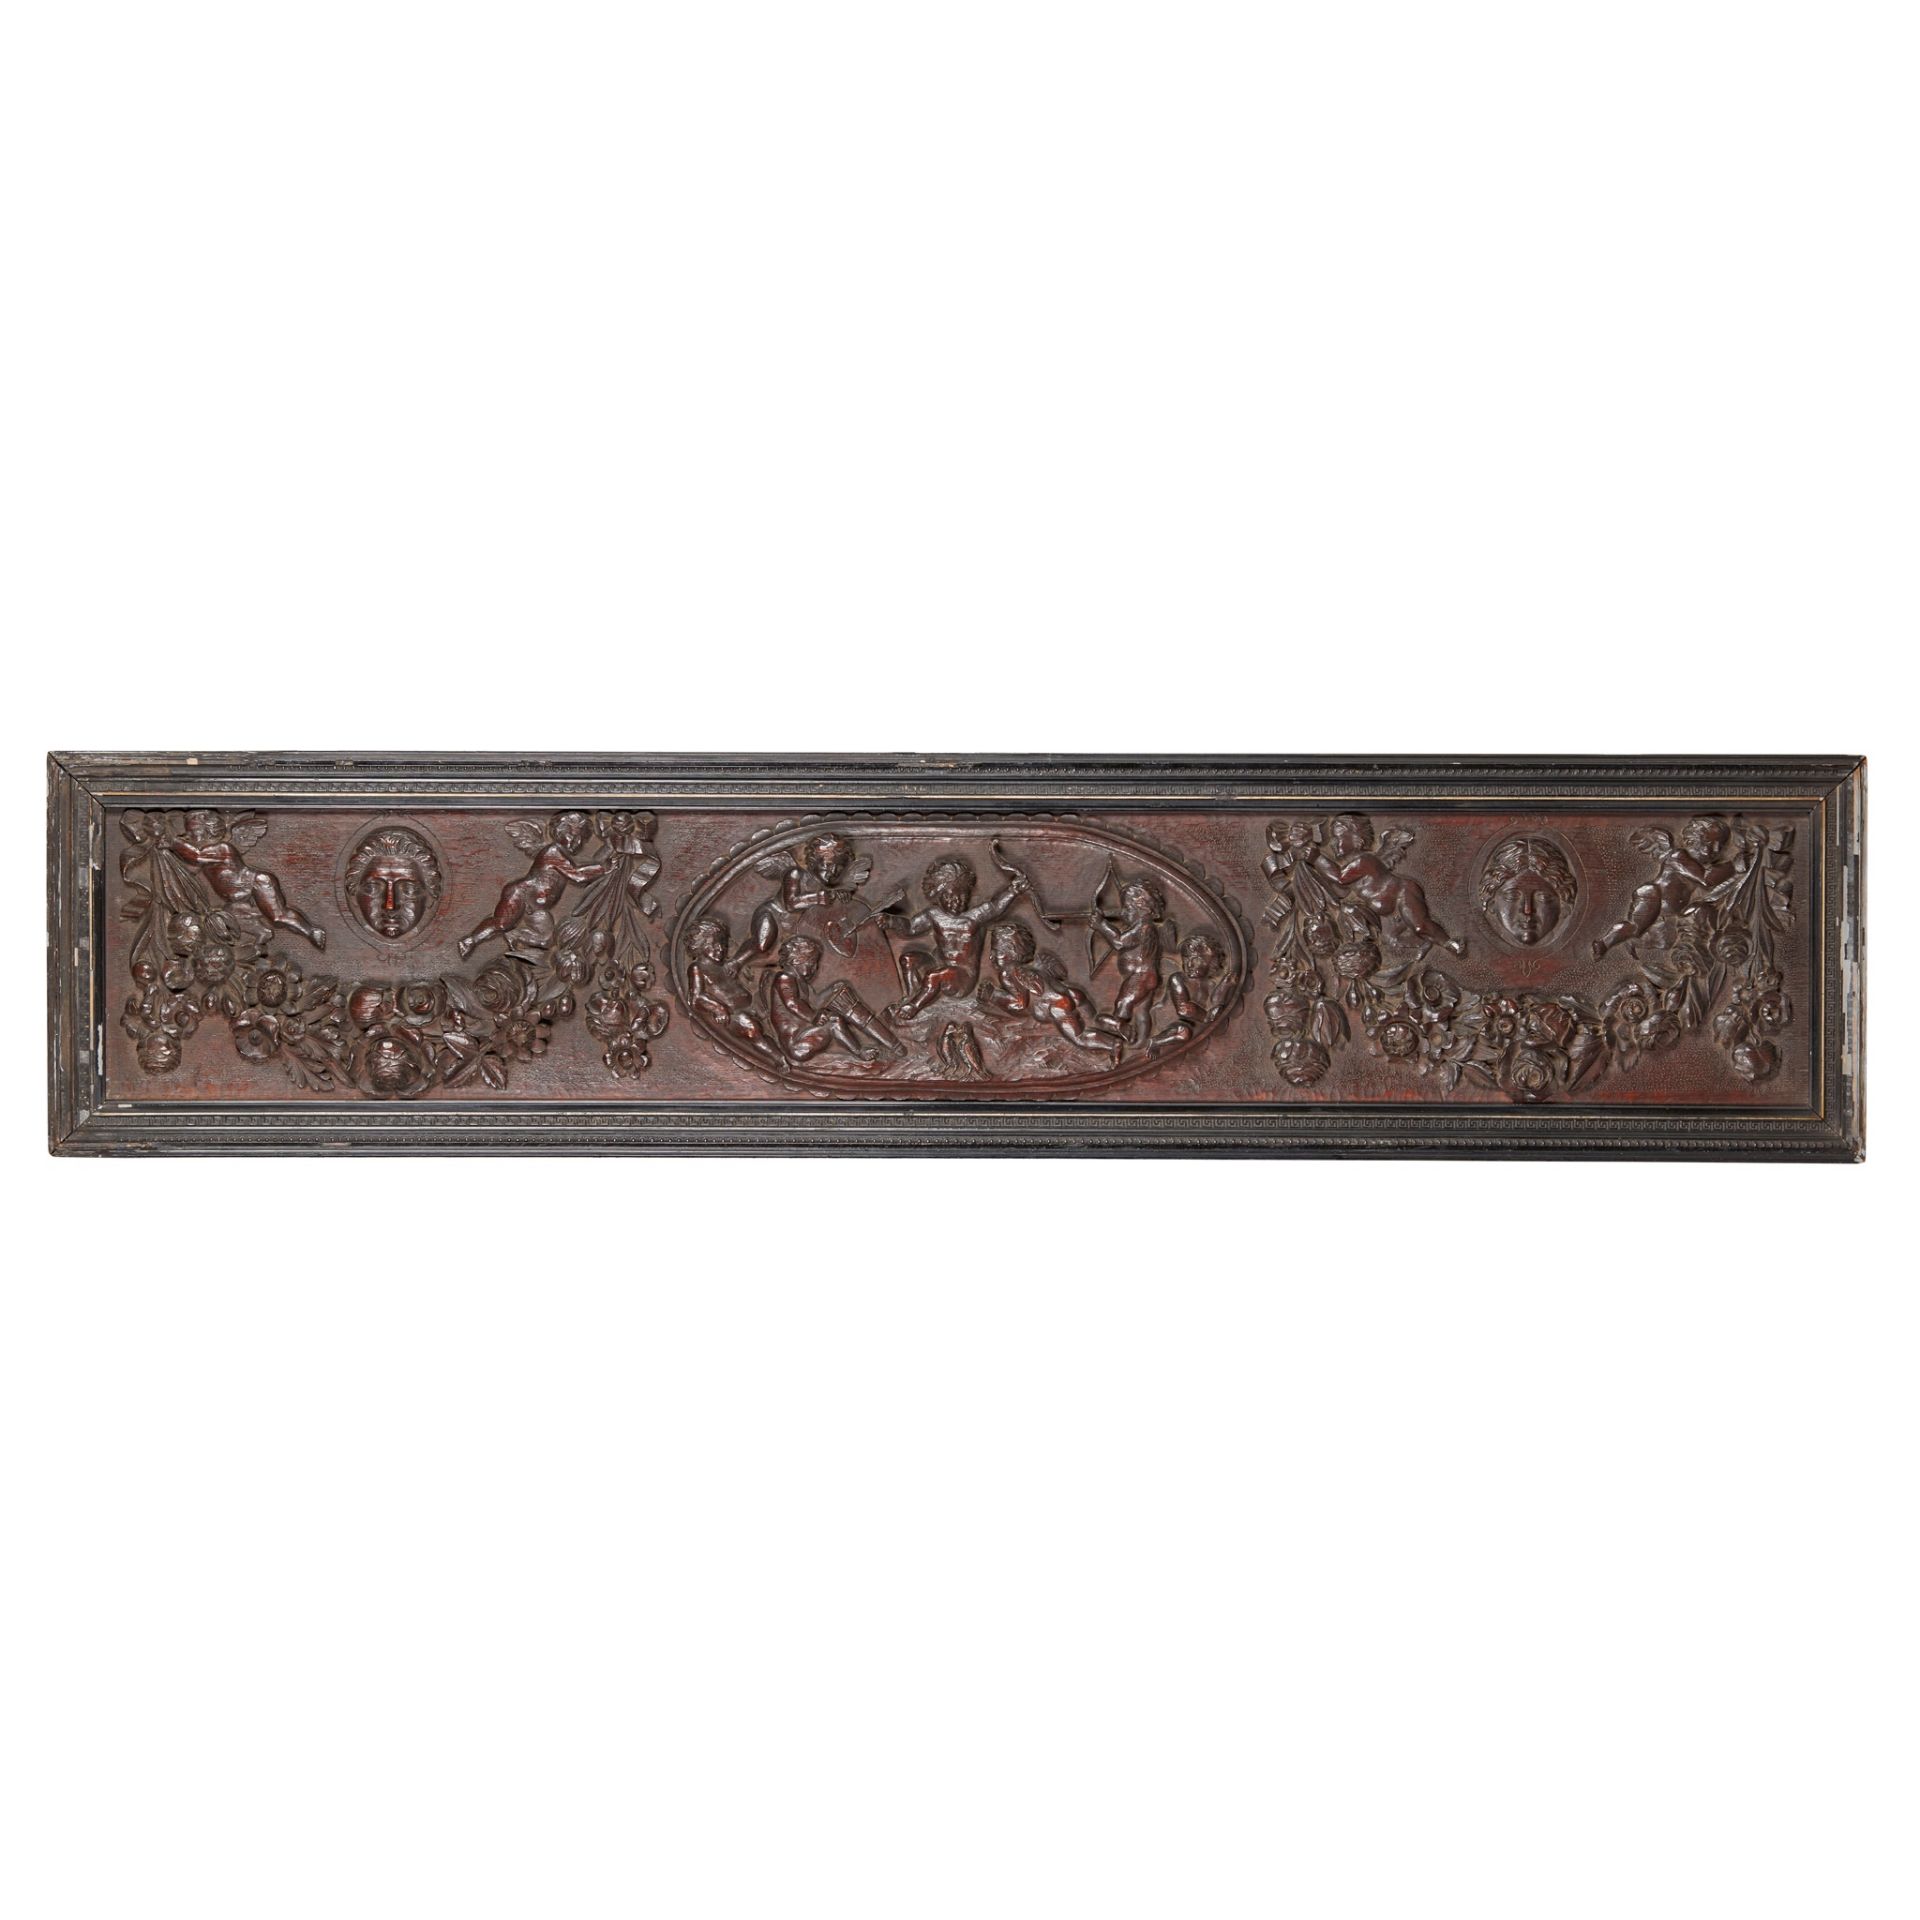 LARGE CONTINENTAL CARVED WALNUT PANEL 19TH CENTURY